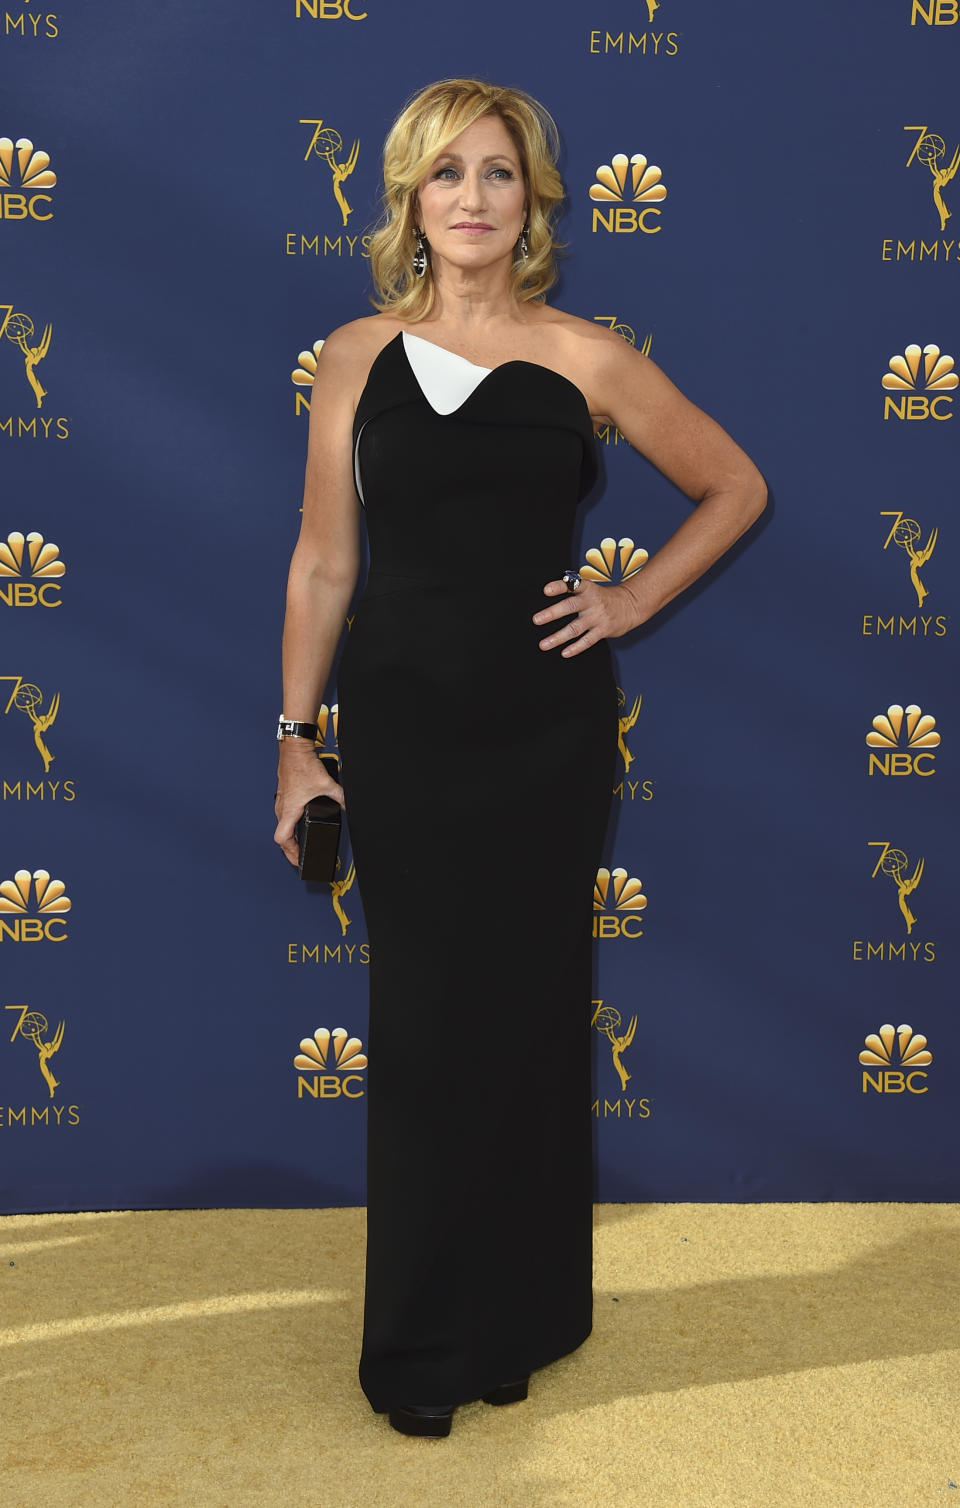 FILE - Edie Falco arrives at the 70th Primetime Emmy Awards on Sept. 17, 2018, in Los Angeles. Falco turns 58 on July 5. (Photo by Jordan Strauss/Invision/AP, File)